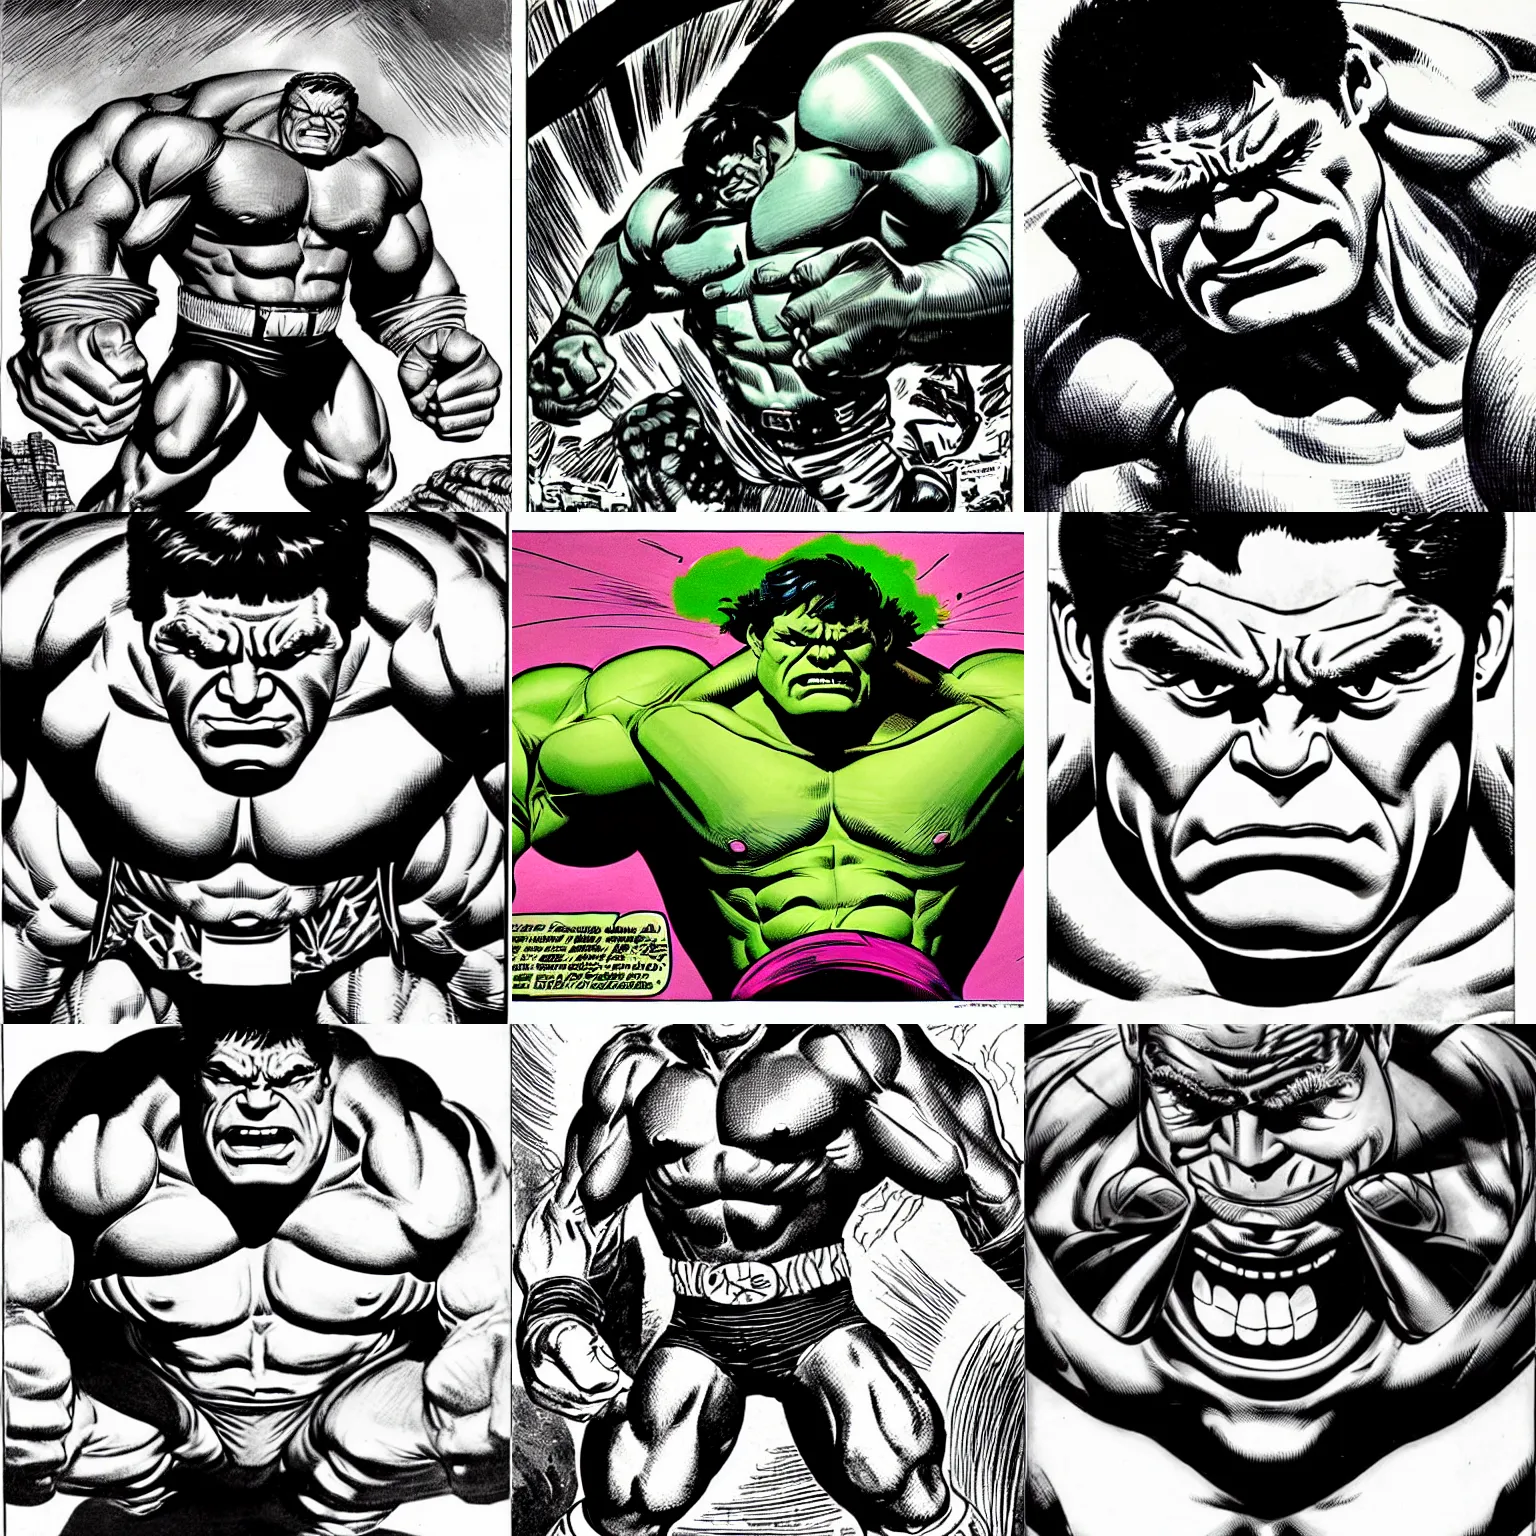 Prompt: by jack kirby : macro face of hulk